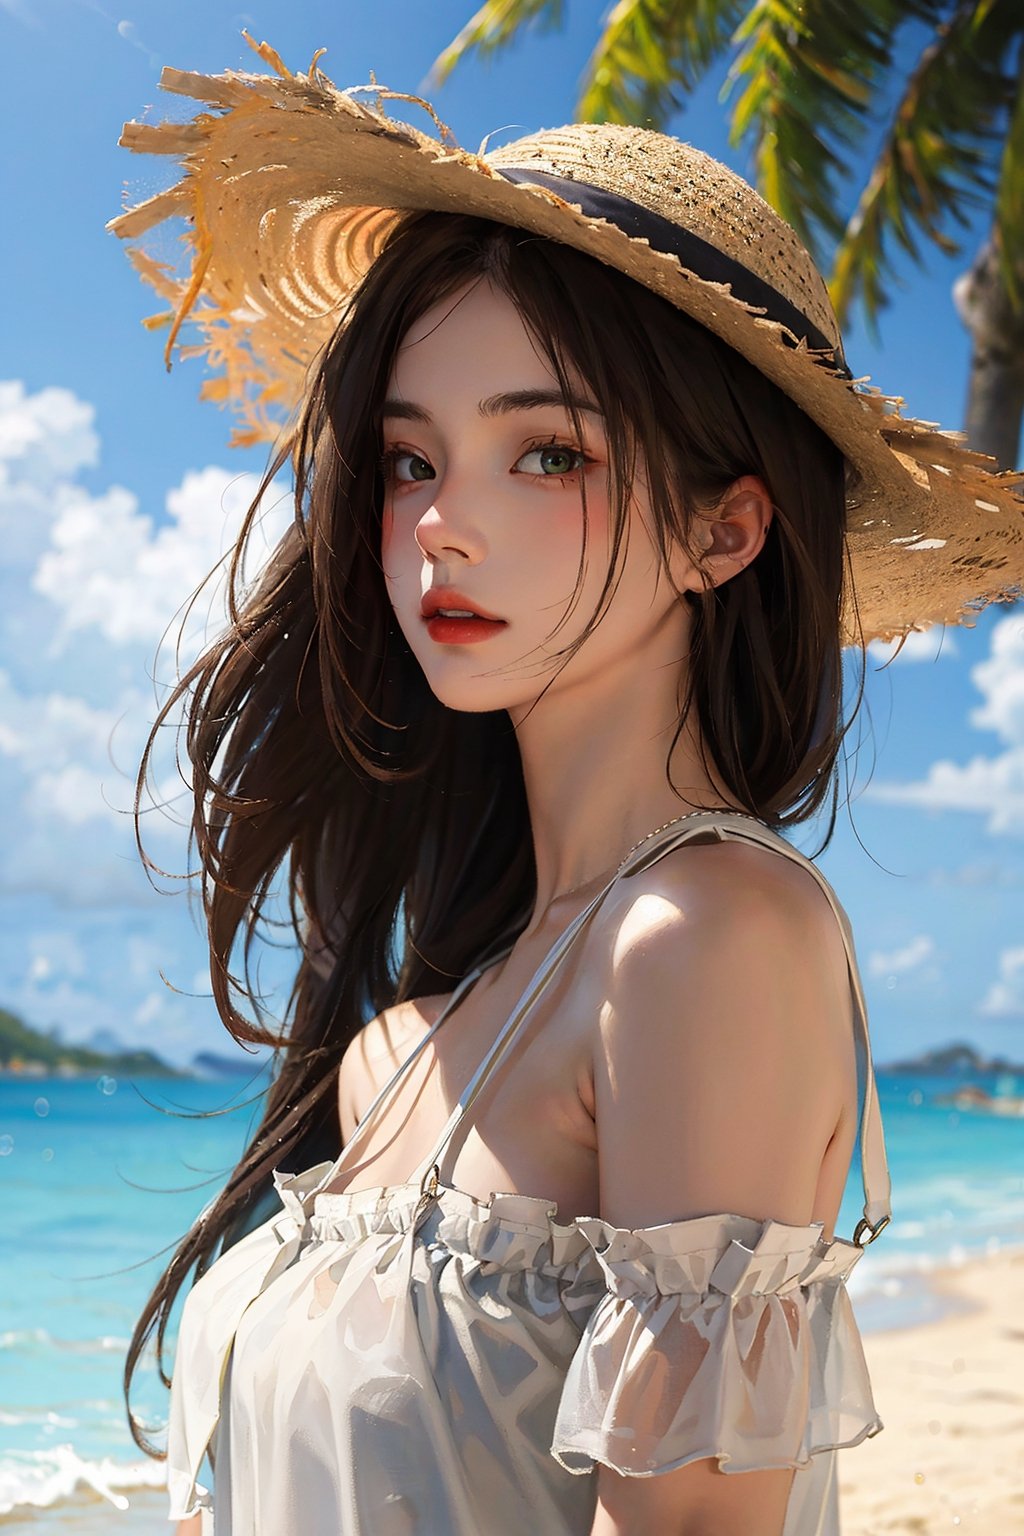 ((masterpiece, best quality, detailed)), (realistic:1.3), a 20 yo woman, brunette, sundress, straw hat, at the beach